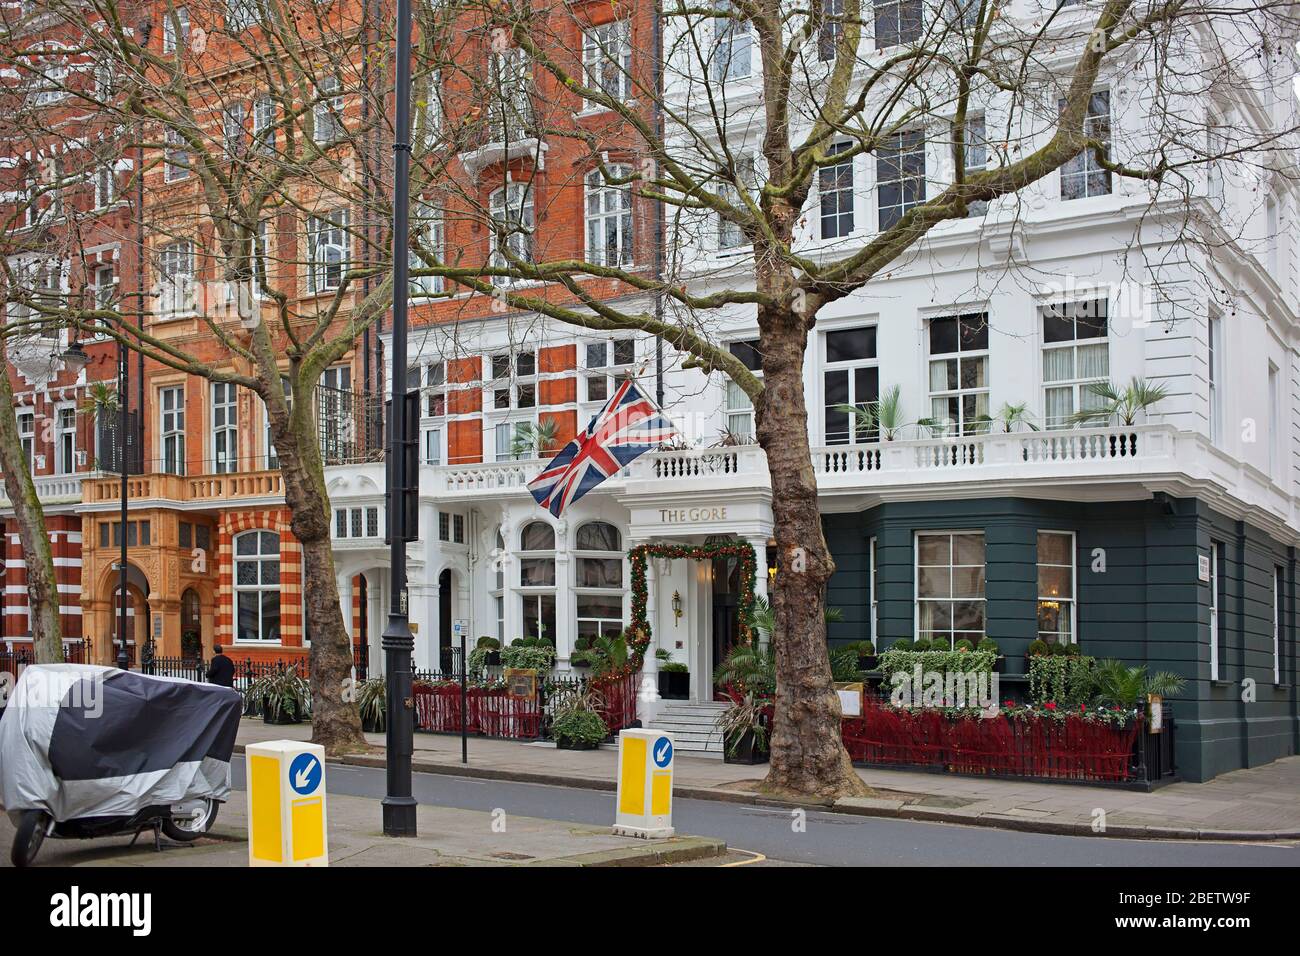 Apartments and embassies in Kensington, London Stock Photo